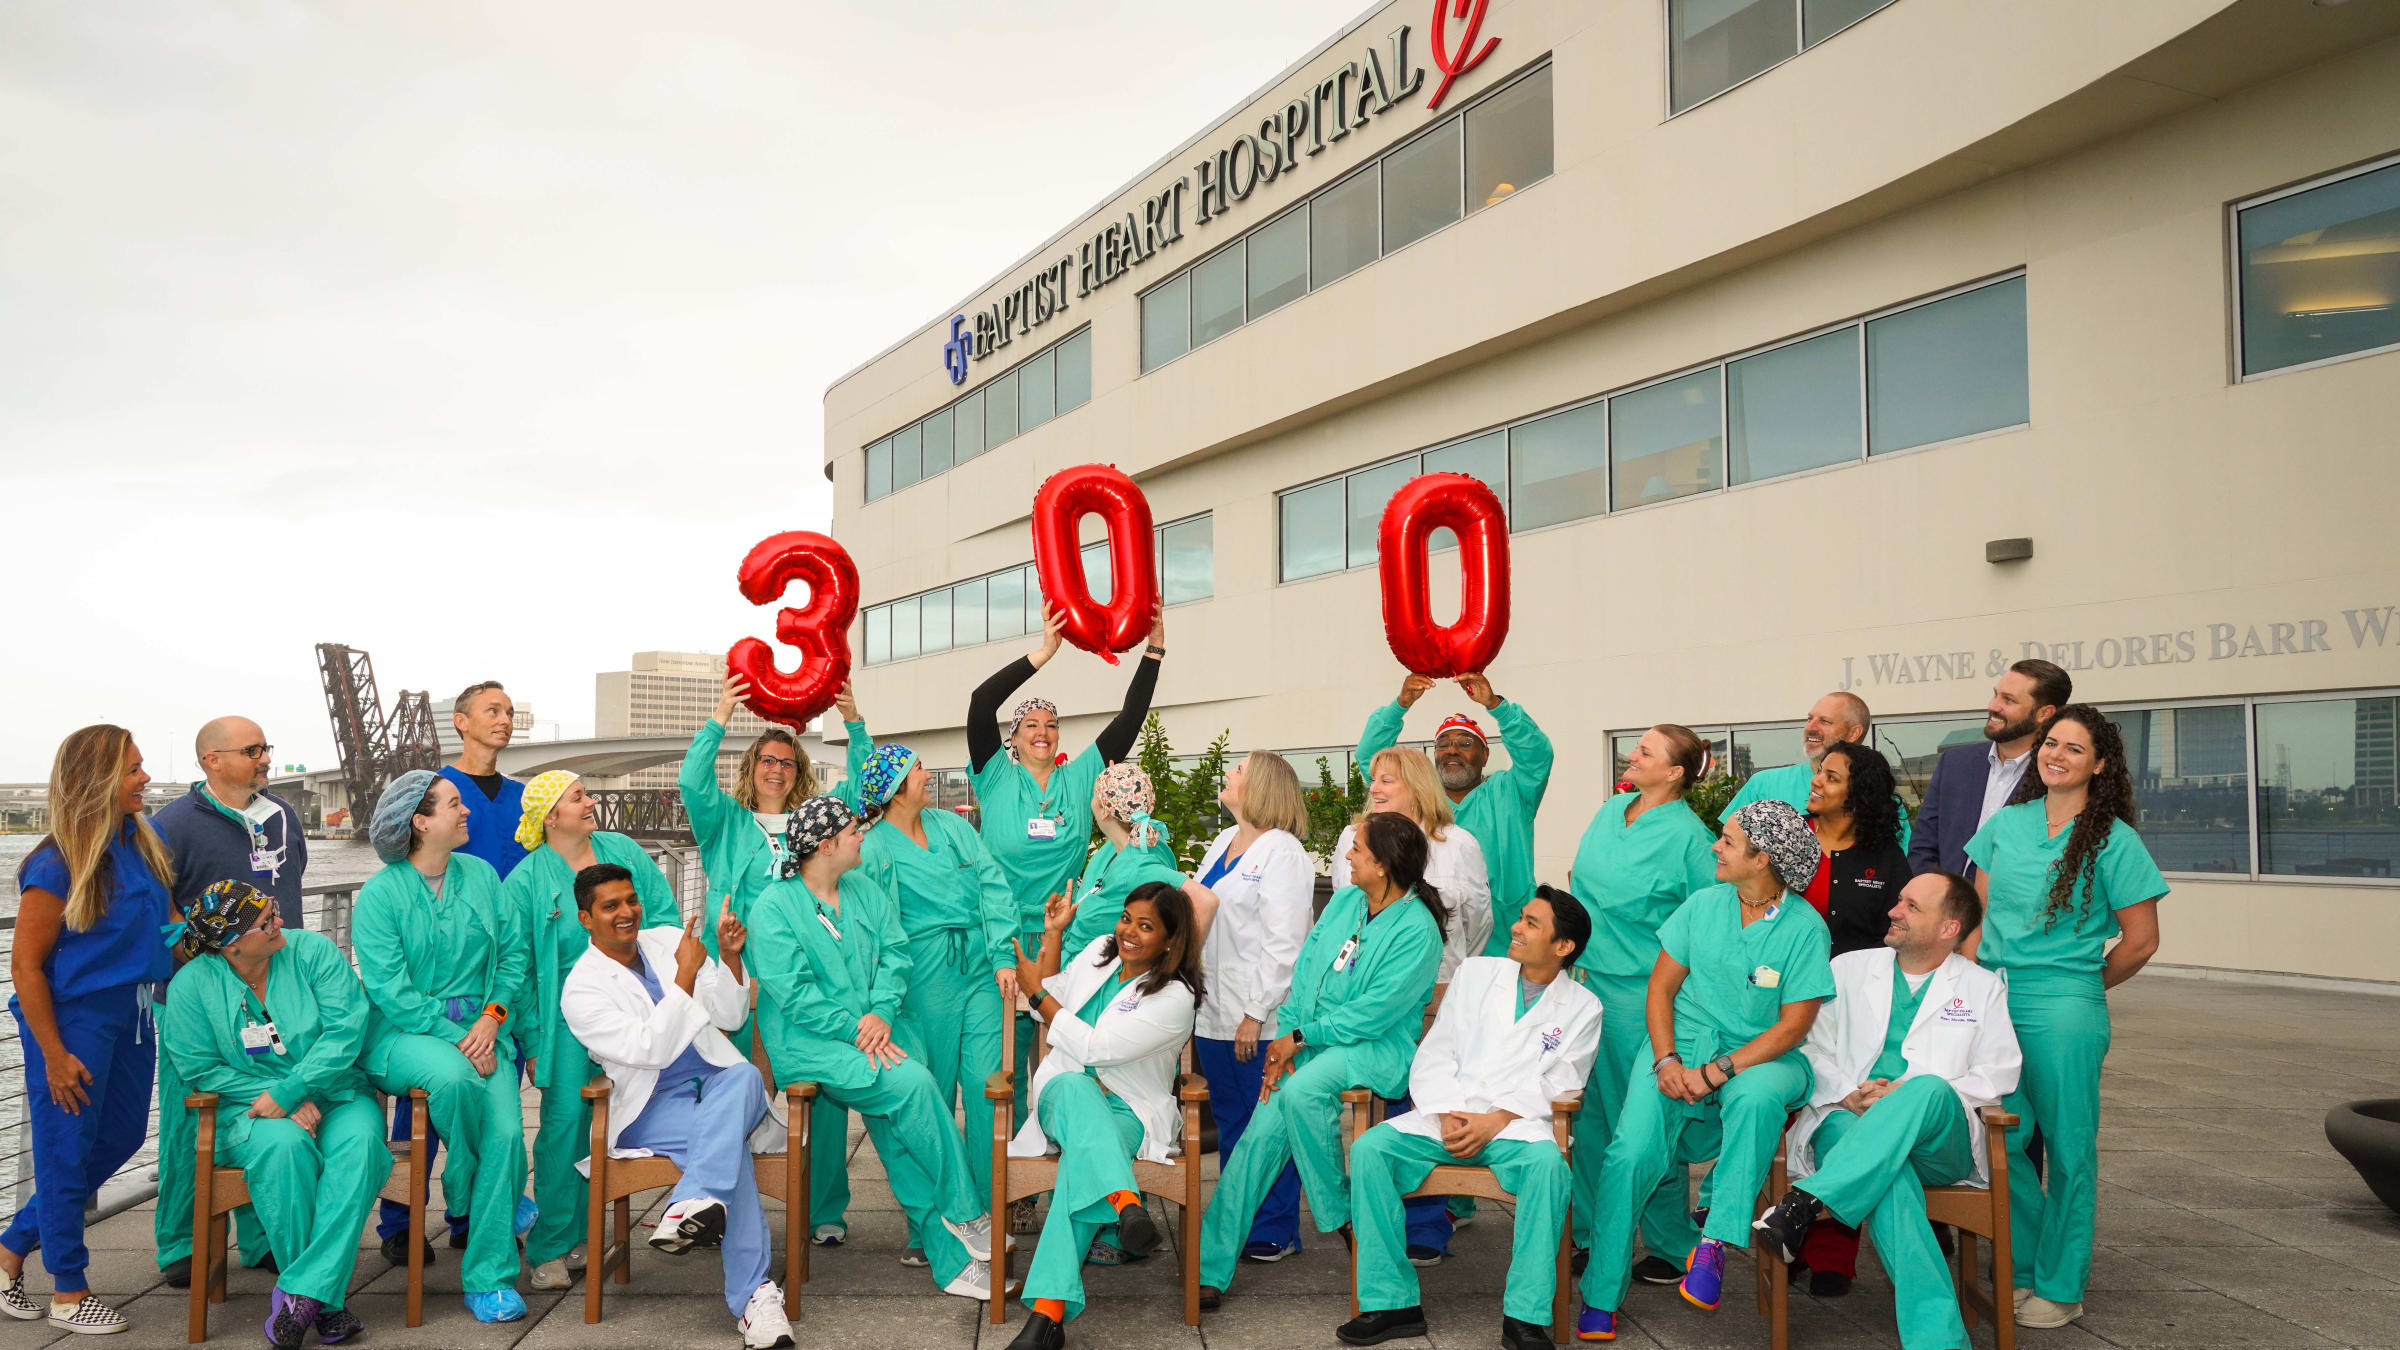 large group photo of providers holding up balloons in front of Baptist Heart Hospital